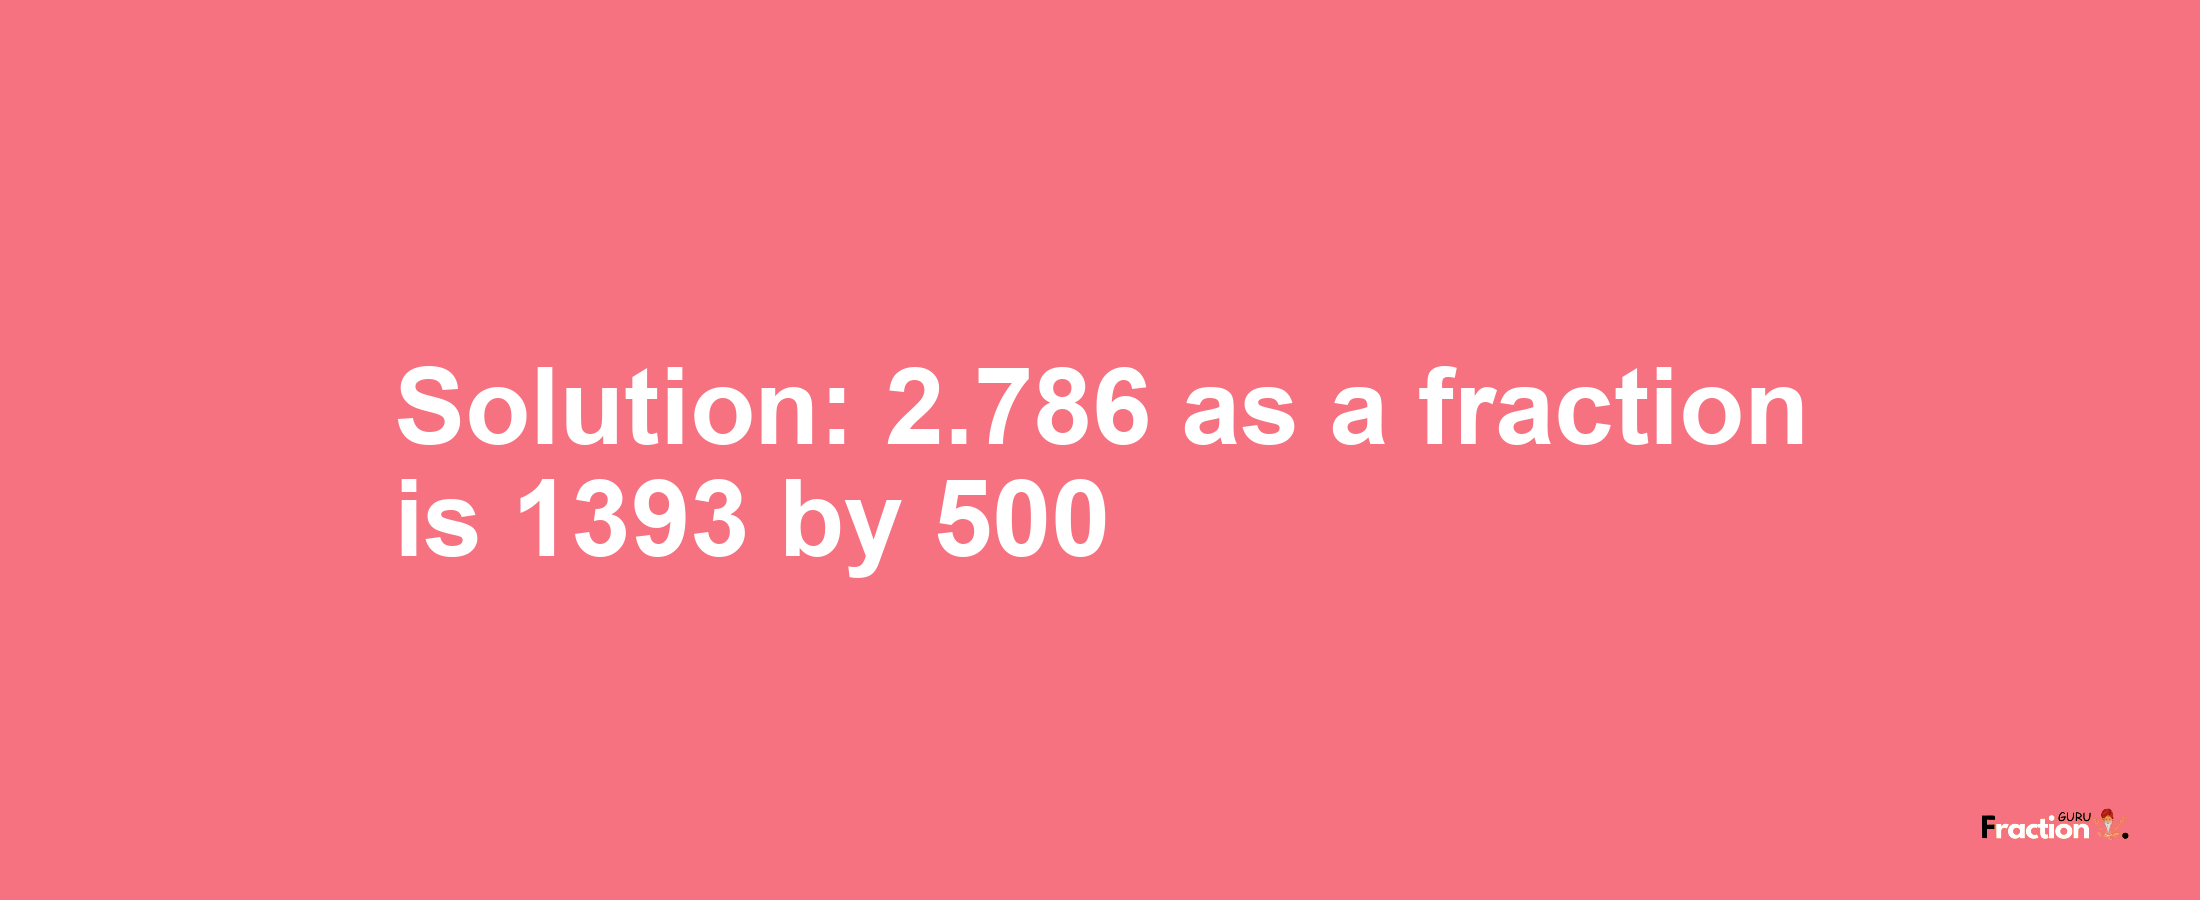 Solution:2.786 as a fraction is 1393/500